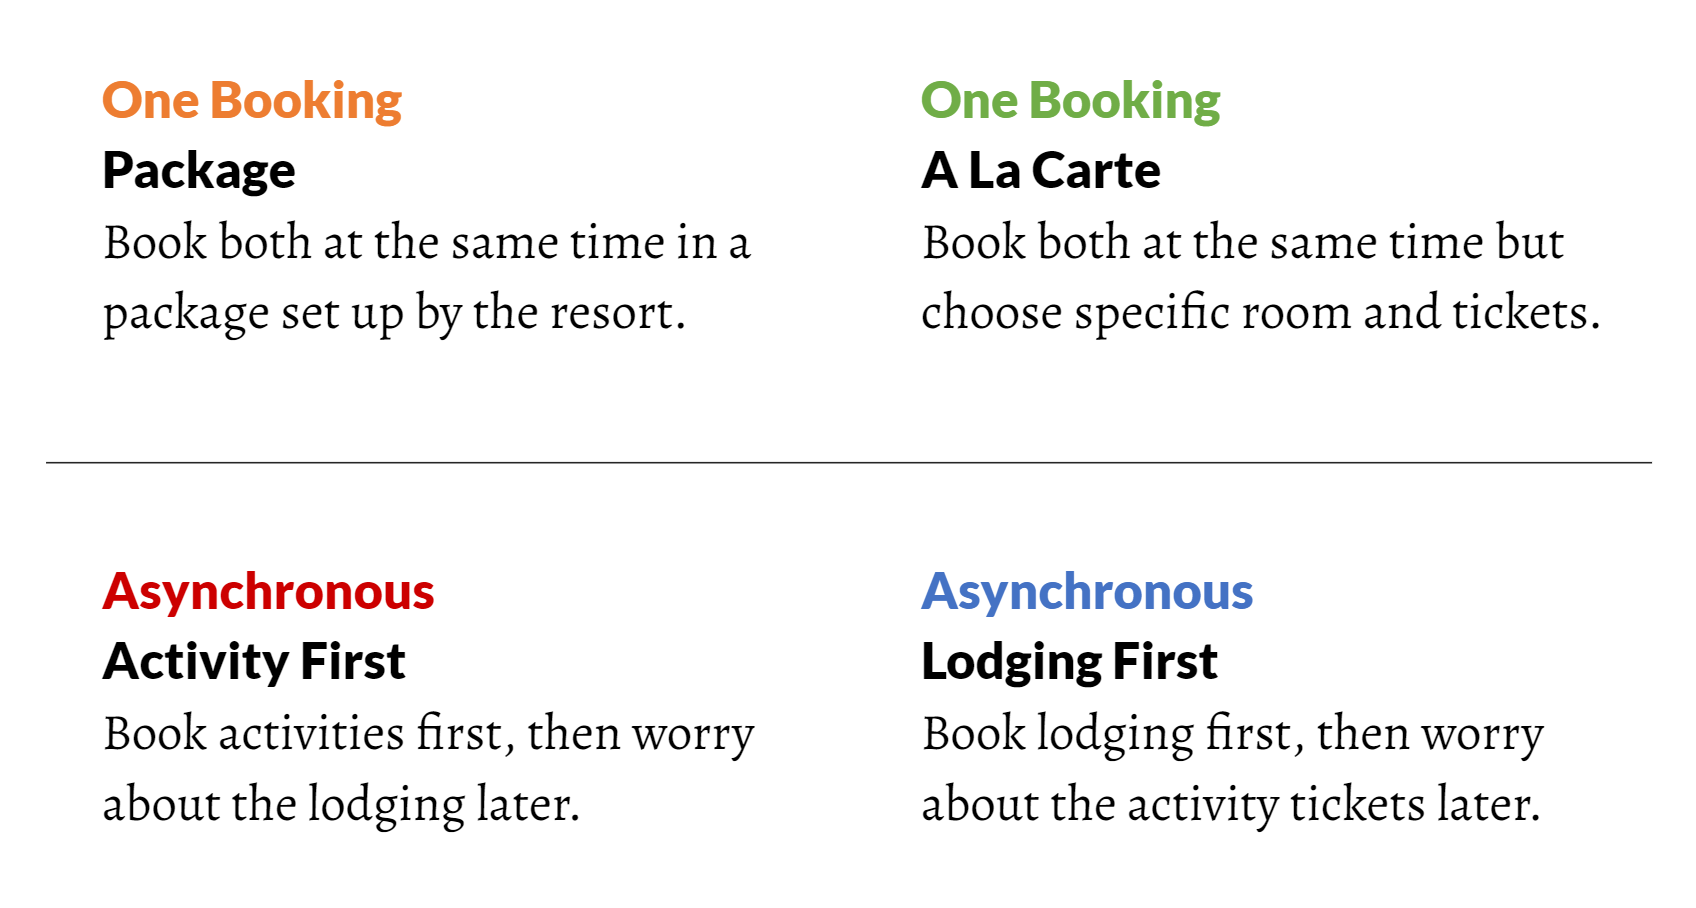 matrix of how guests prefer to book